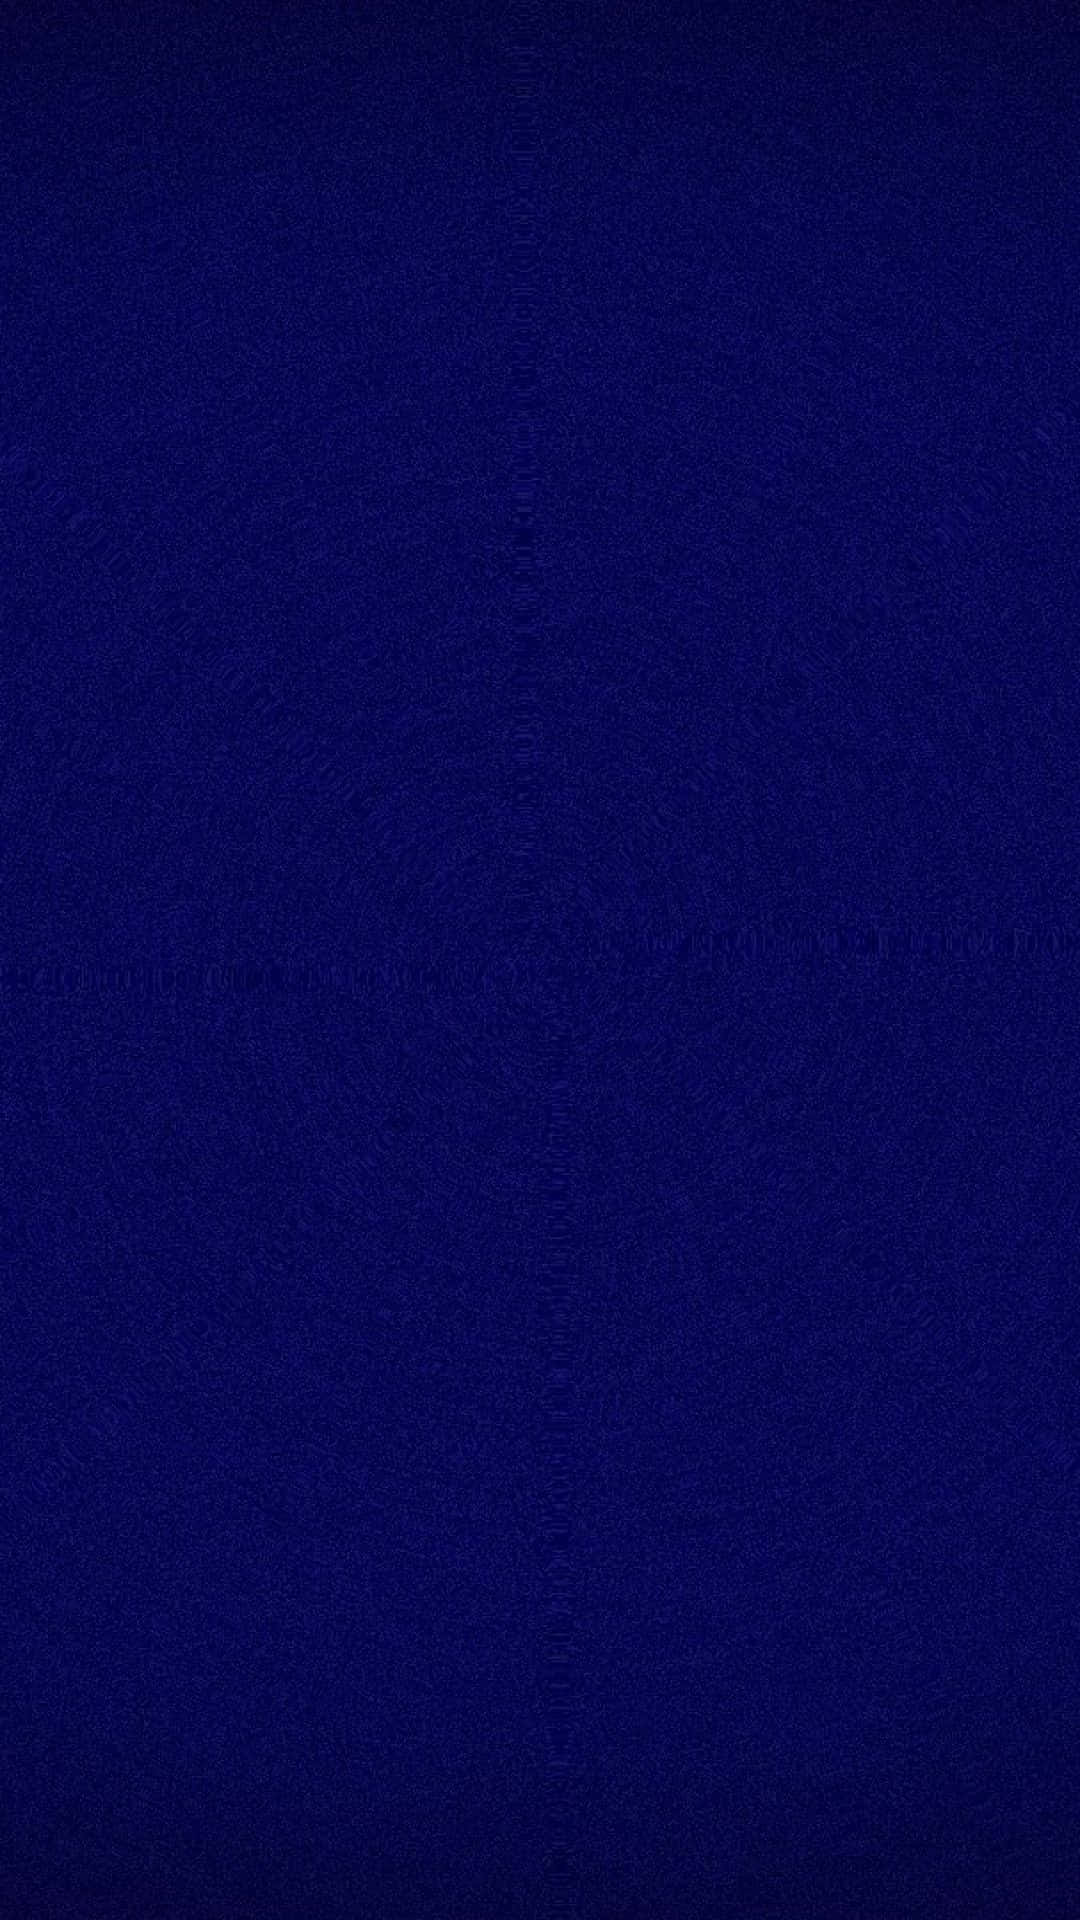 Blue Solid Background